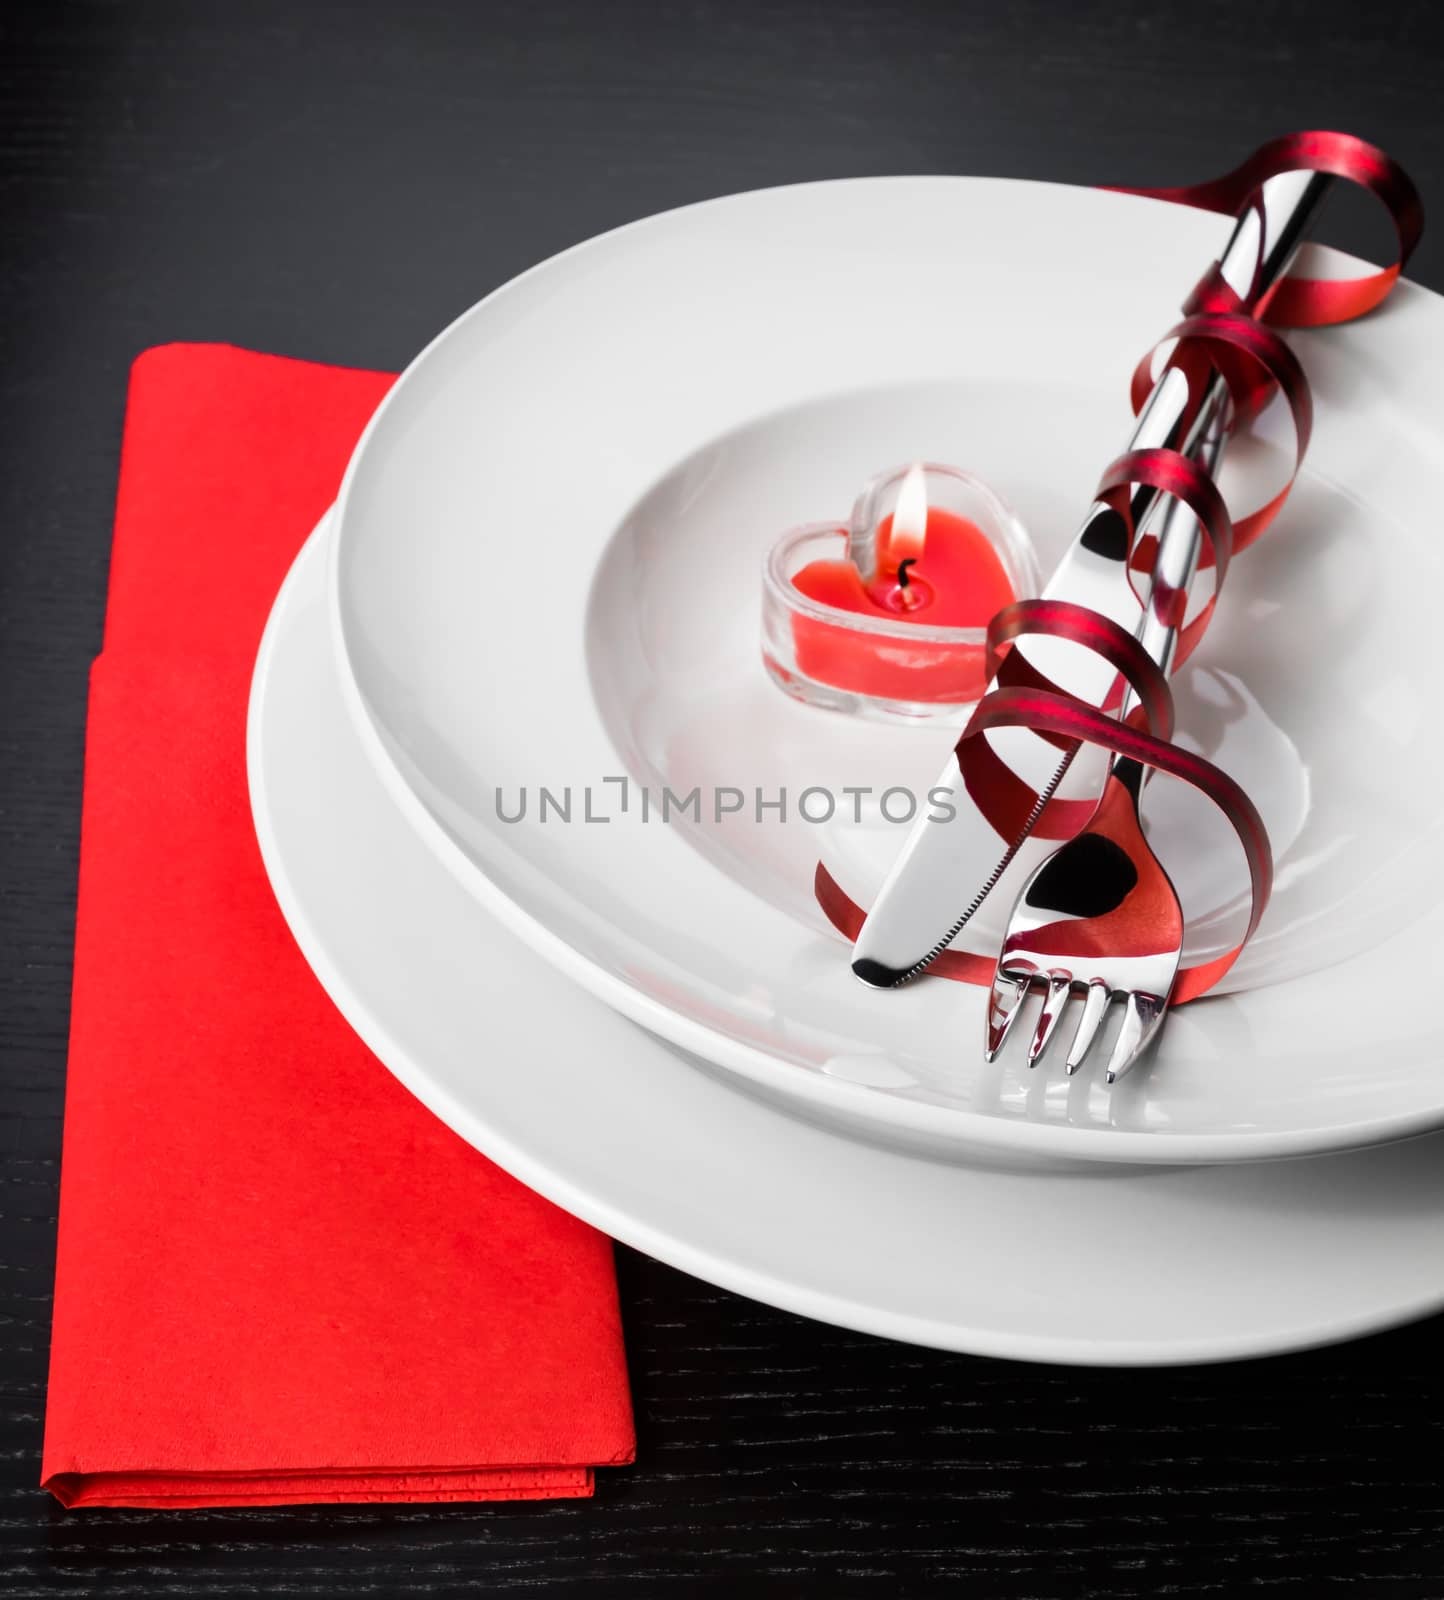 restaurant series. Valentine day dinner with table setting in red and holiday elegant heart ornaments